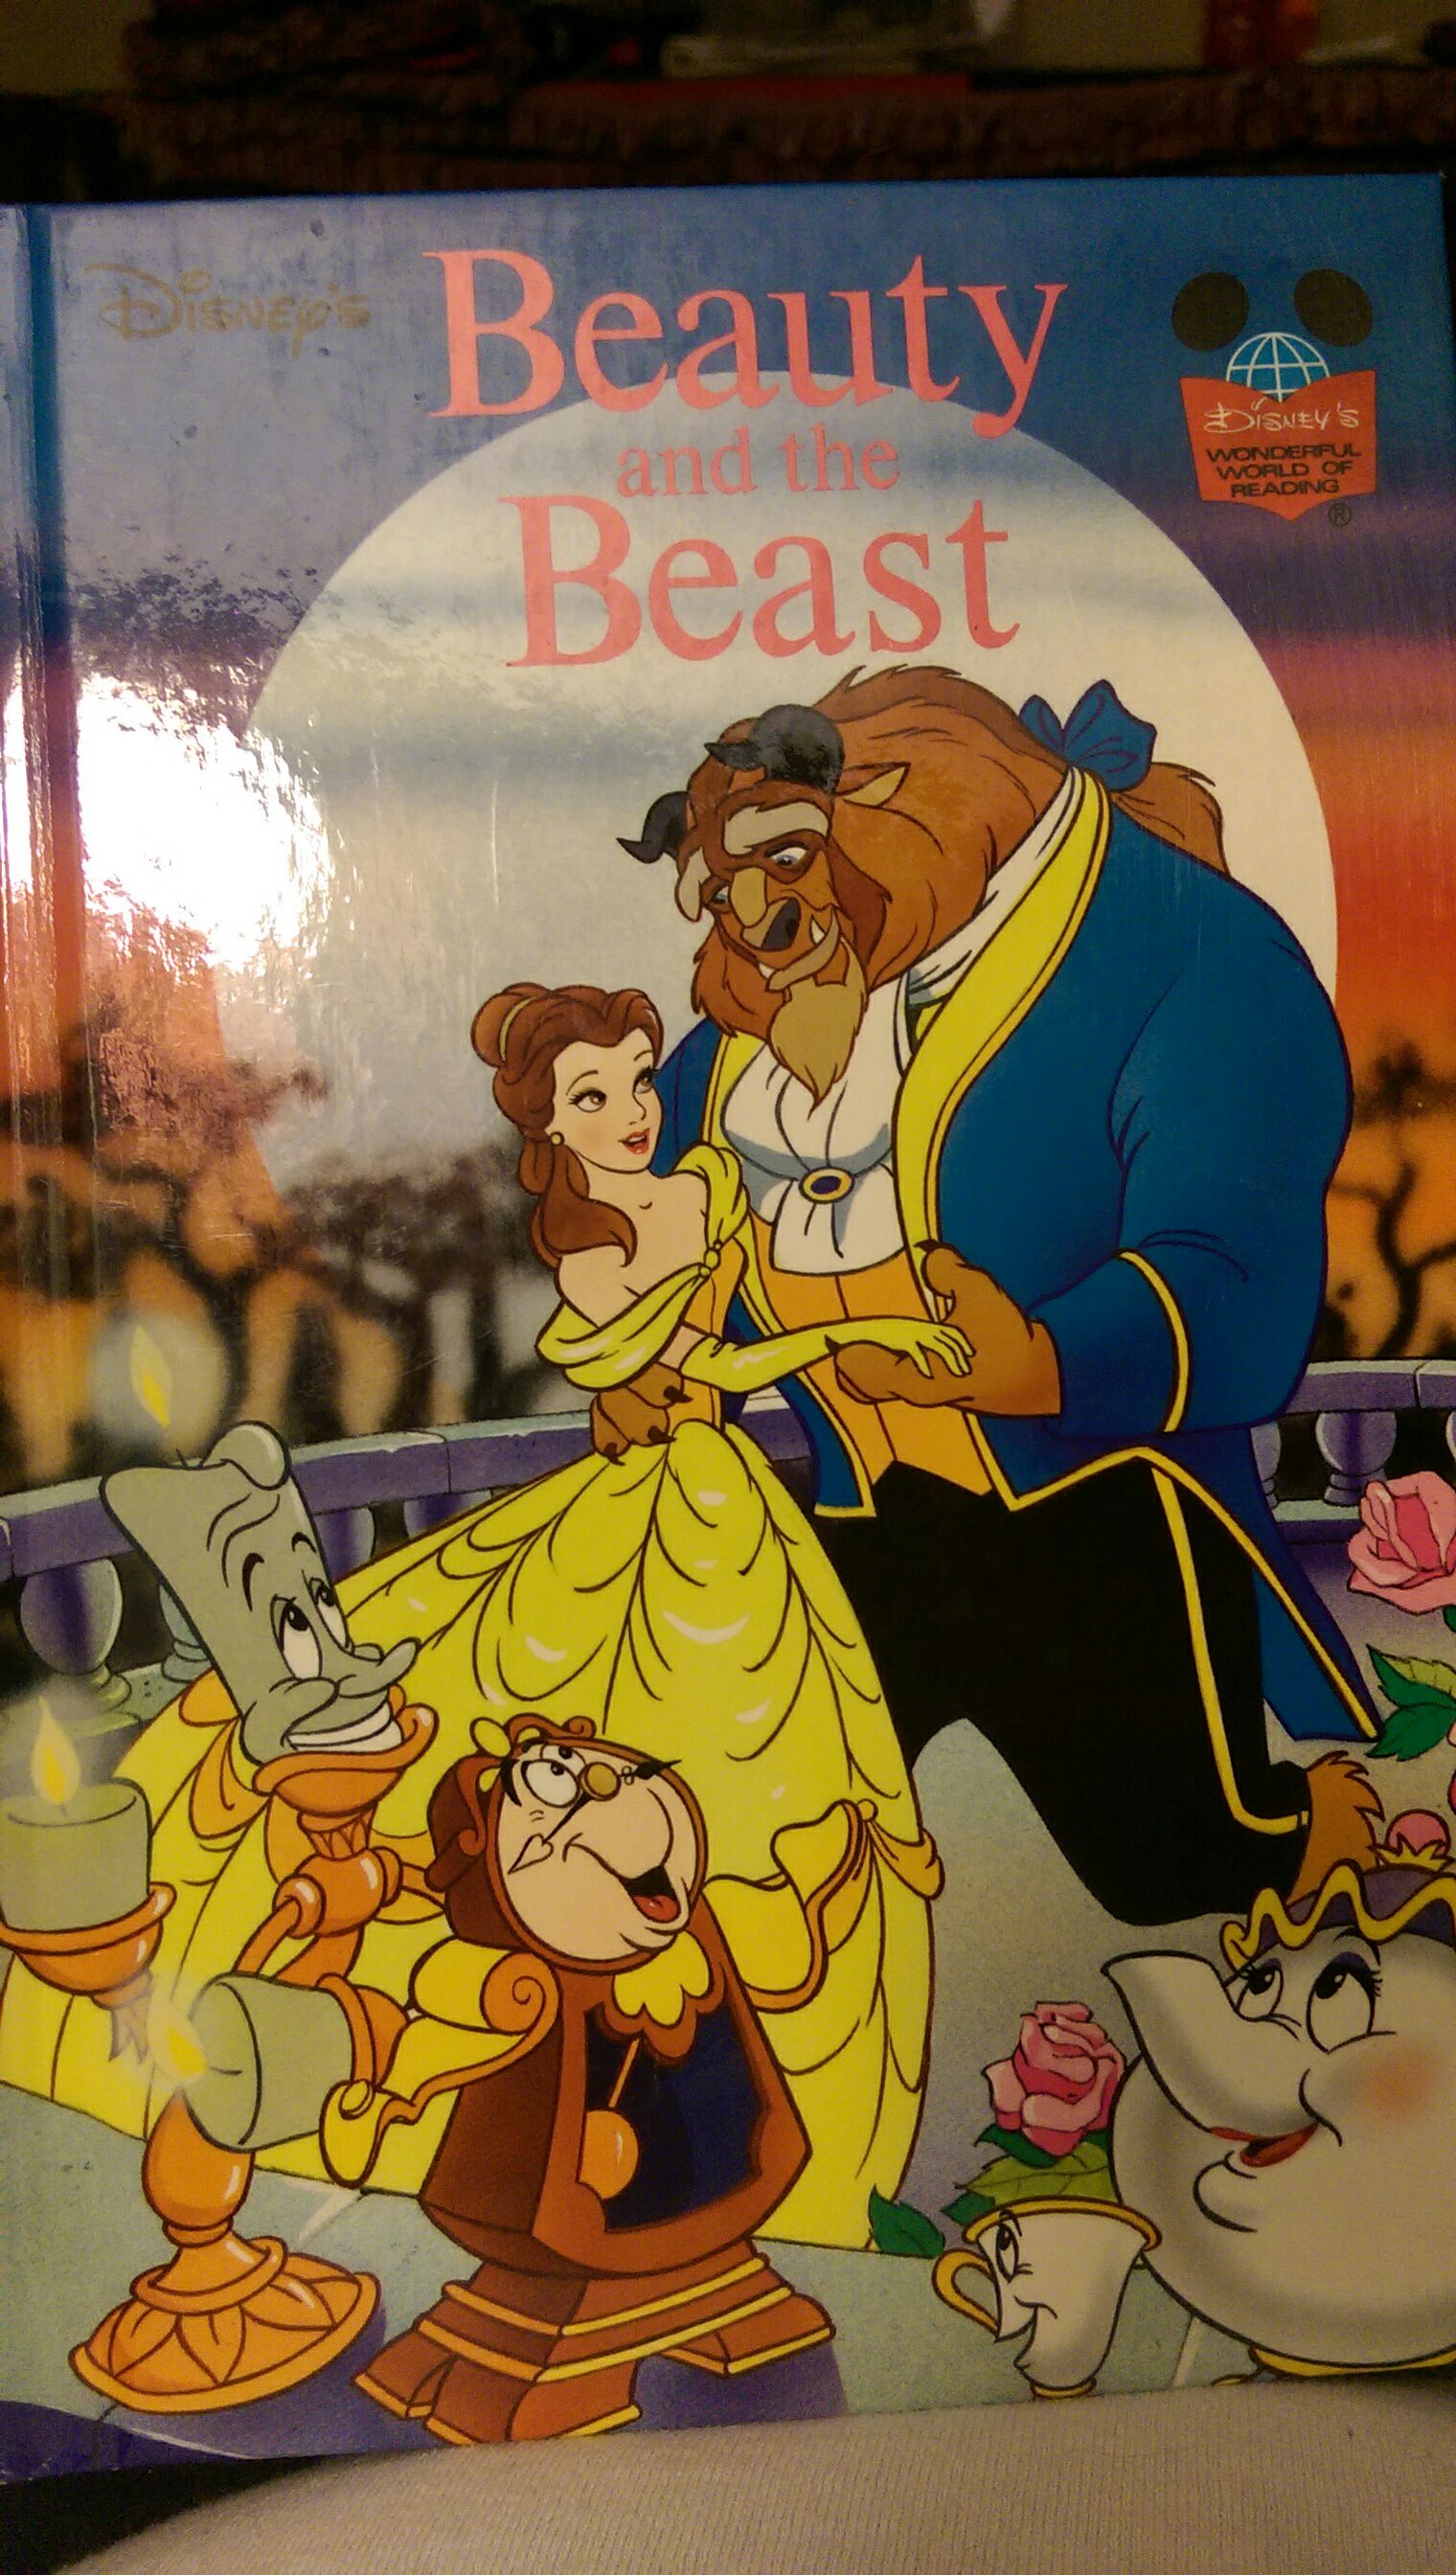 Beauty And The Beast - Della Rowland (Grolier Enterprises Inc. - Hardcover) book collectible - Main Image 1